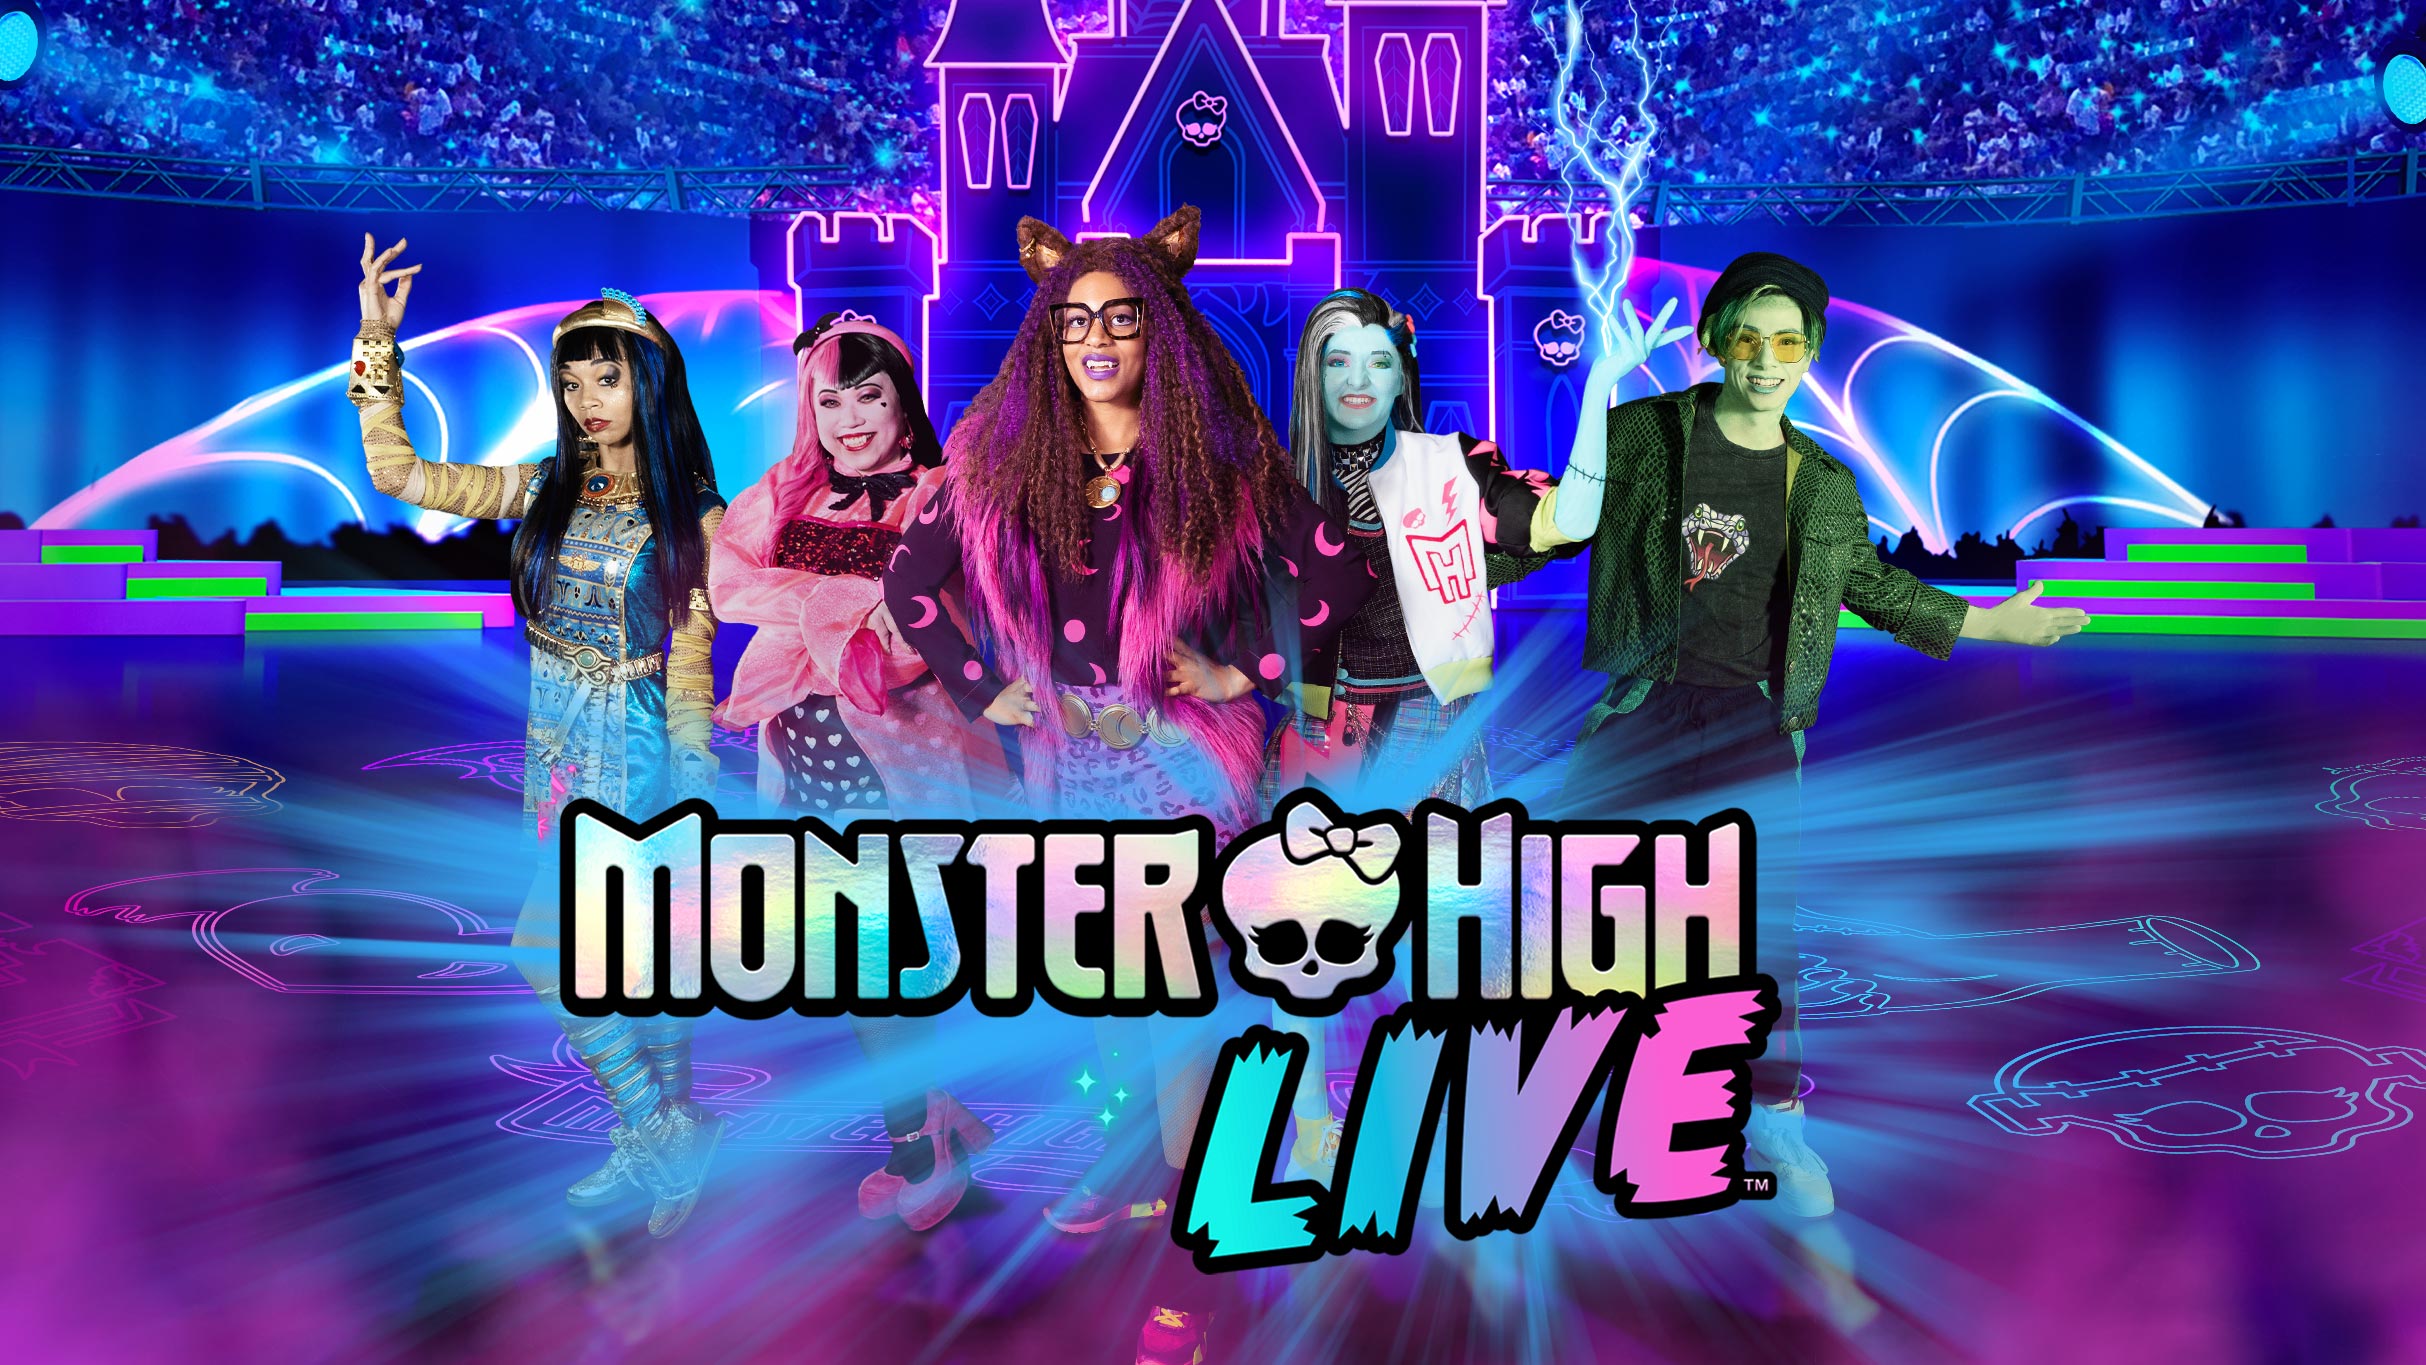 Monster High Live in Milwaukee promo photo for Official Platinum presale offer code